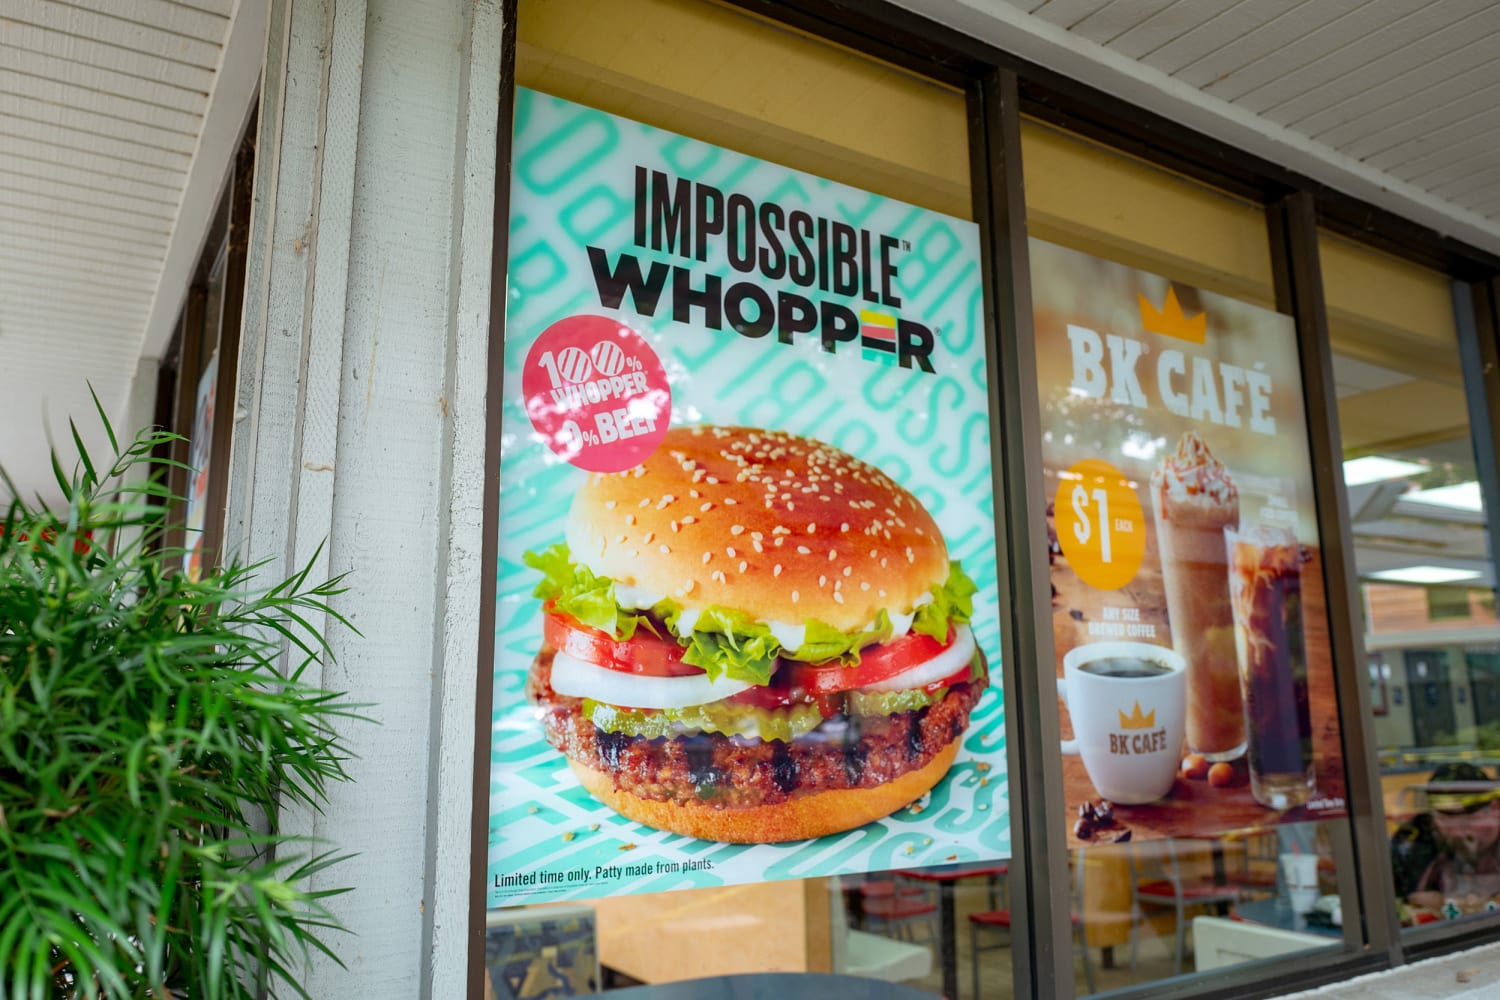 Vegan Man Sues Burger King Says Impossible Whoppers Contaminated By Meat